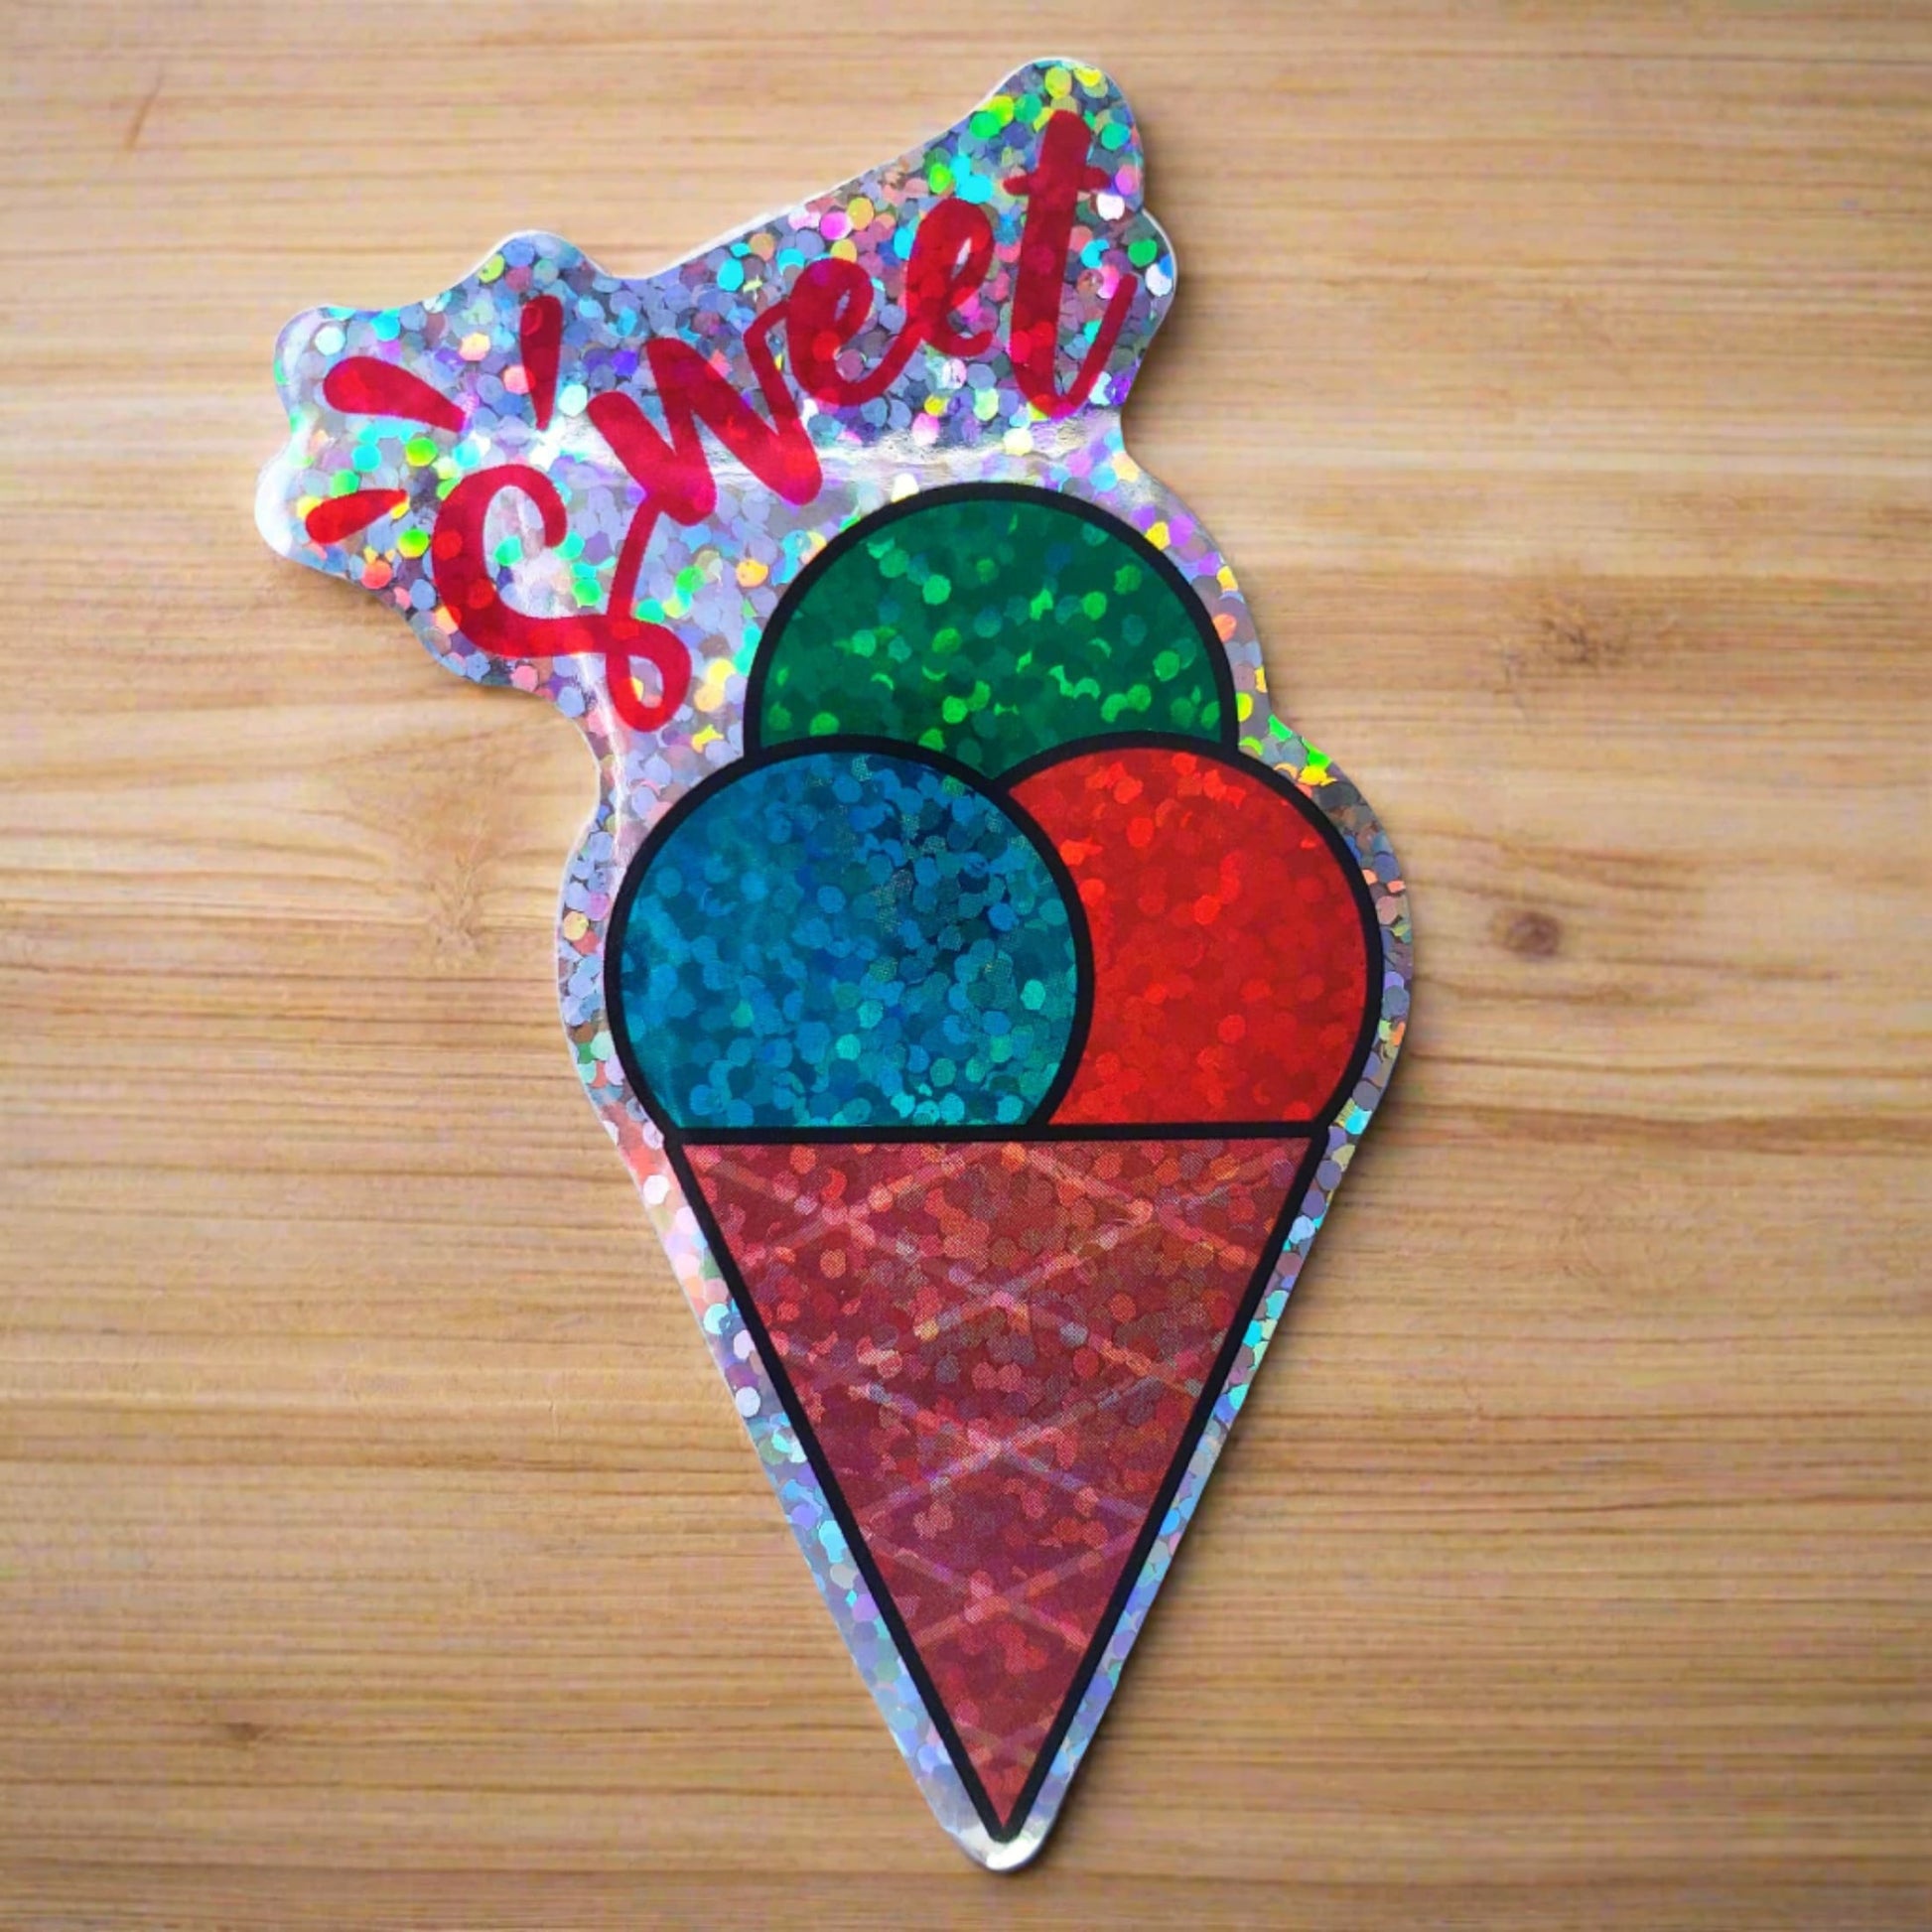 Sweet Ice Cream Cone Holographic Sticker from Confetti Kitty, Only 2